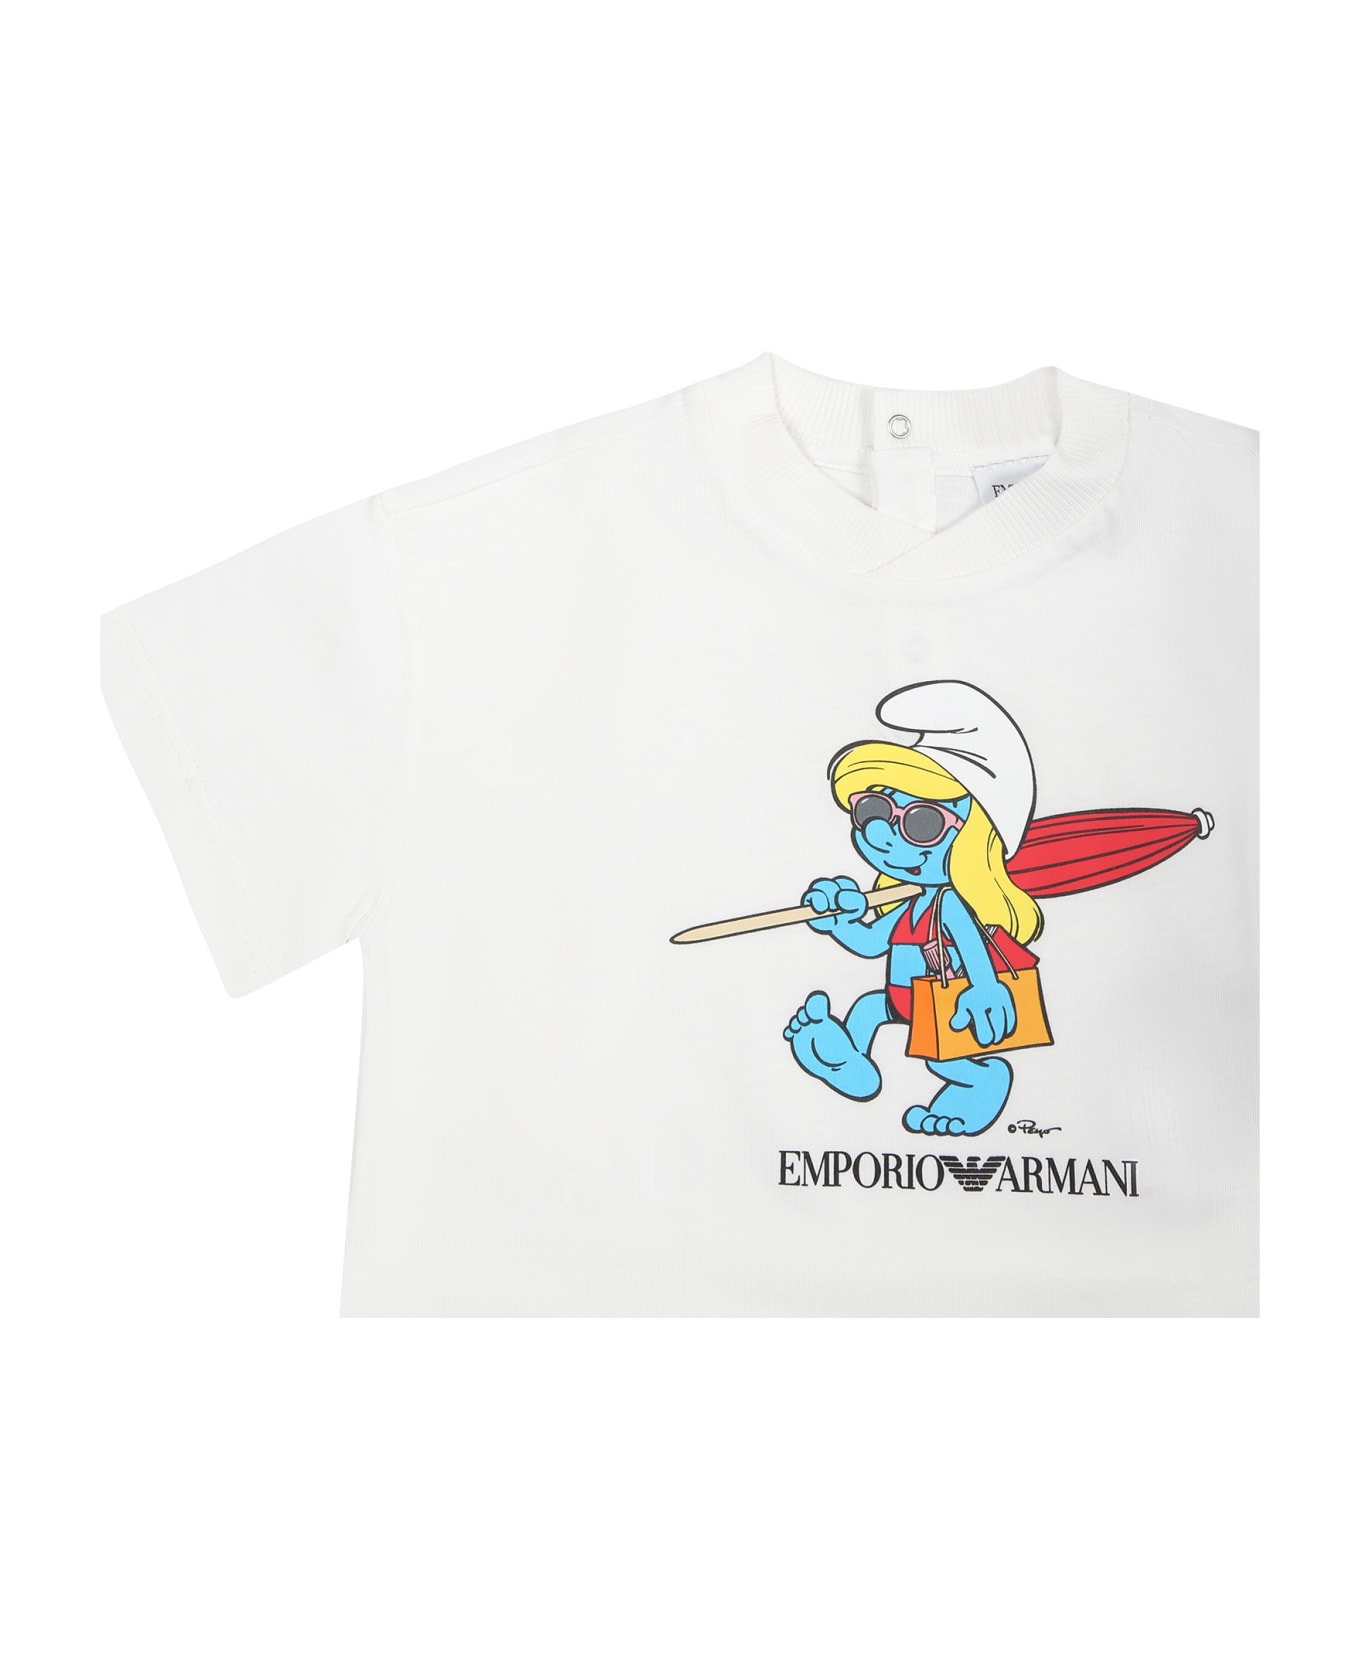 Emporio Armani White T-shirt For Baby Girl With The Smurfs - White